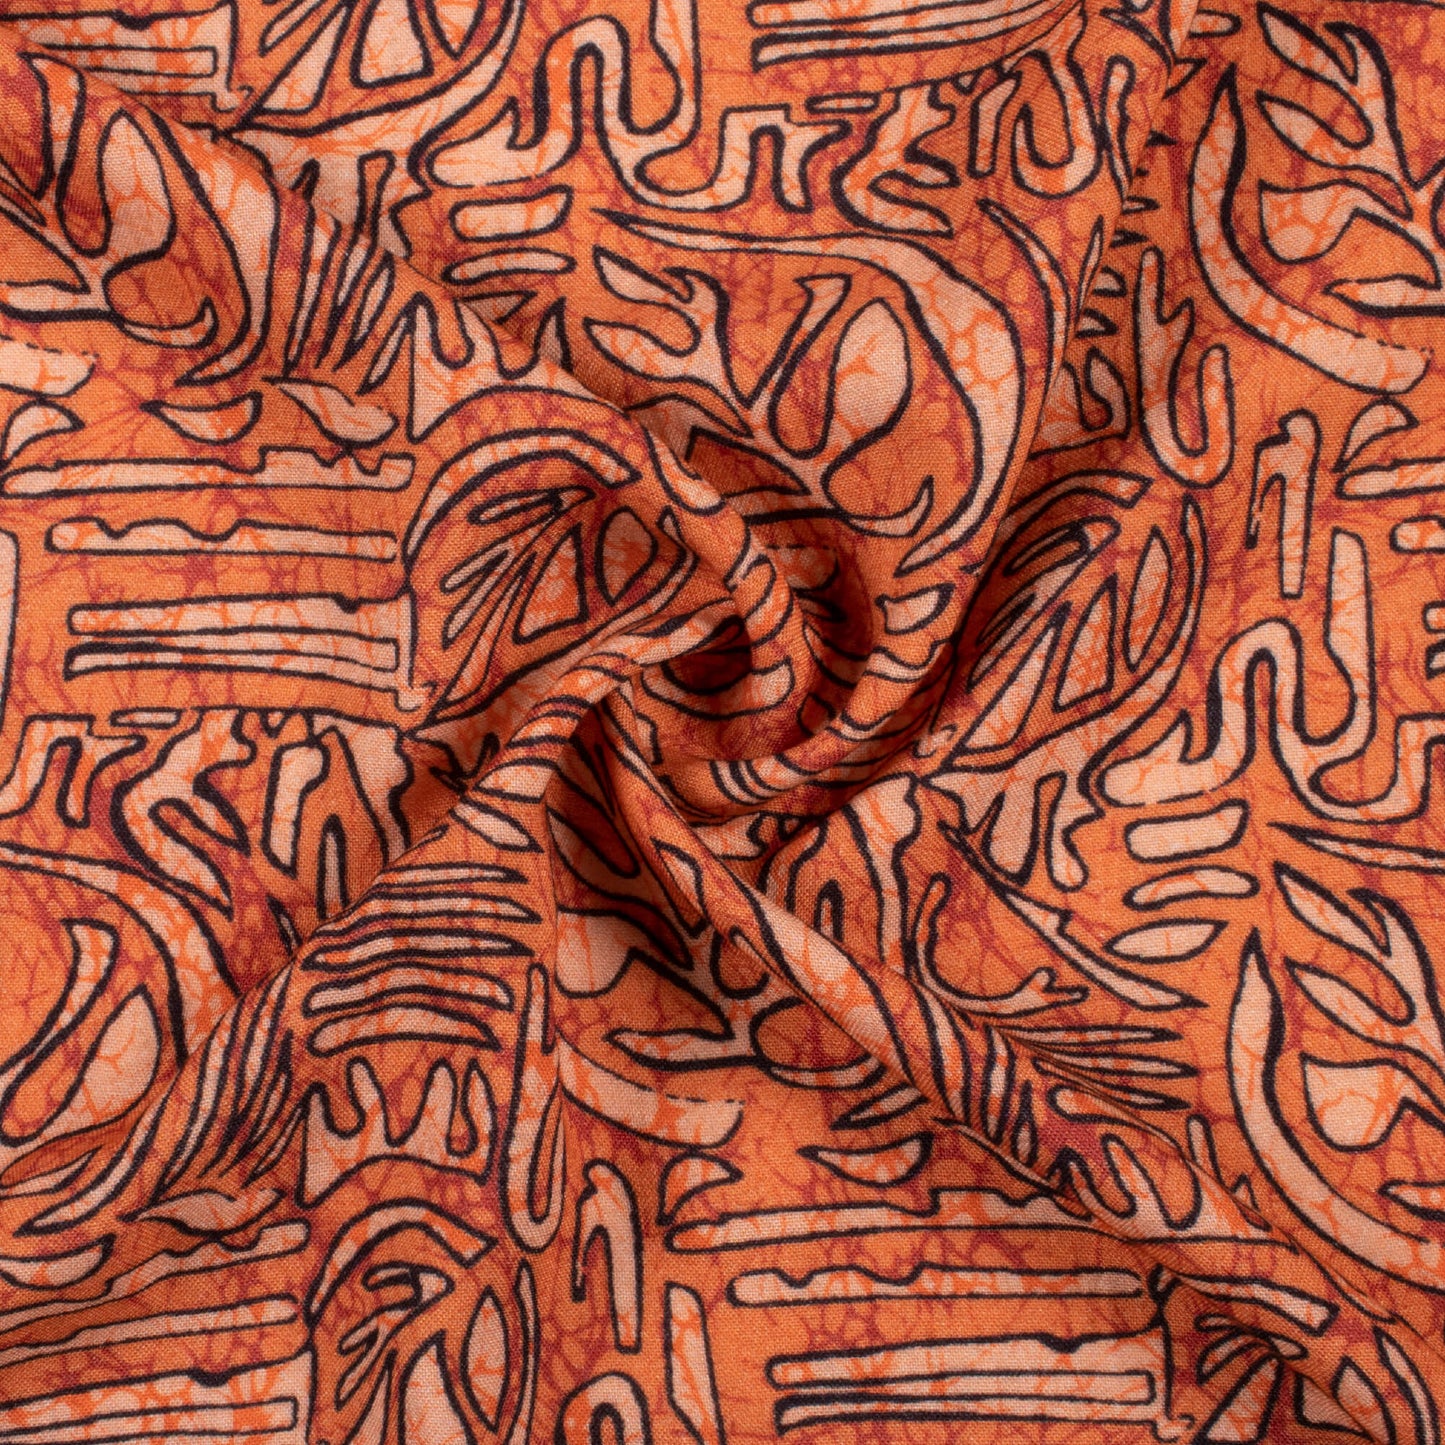 Rust Orange And Black Abstract Pattern Digital Print Viscose Rayon Fabric (Width 58 Inches)